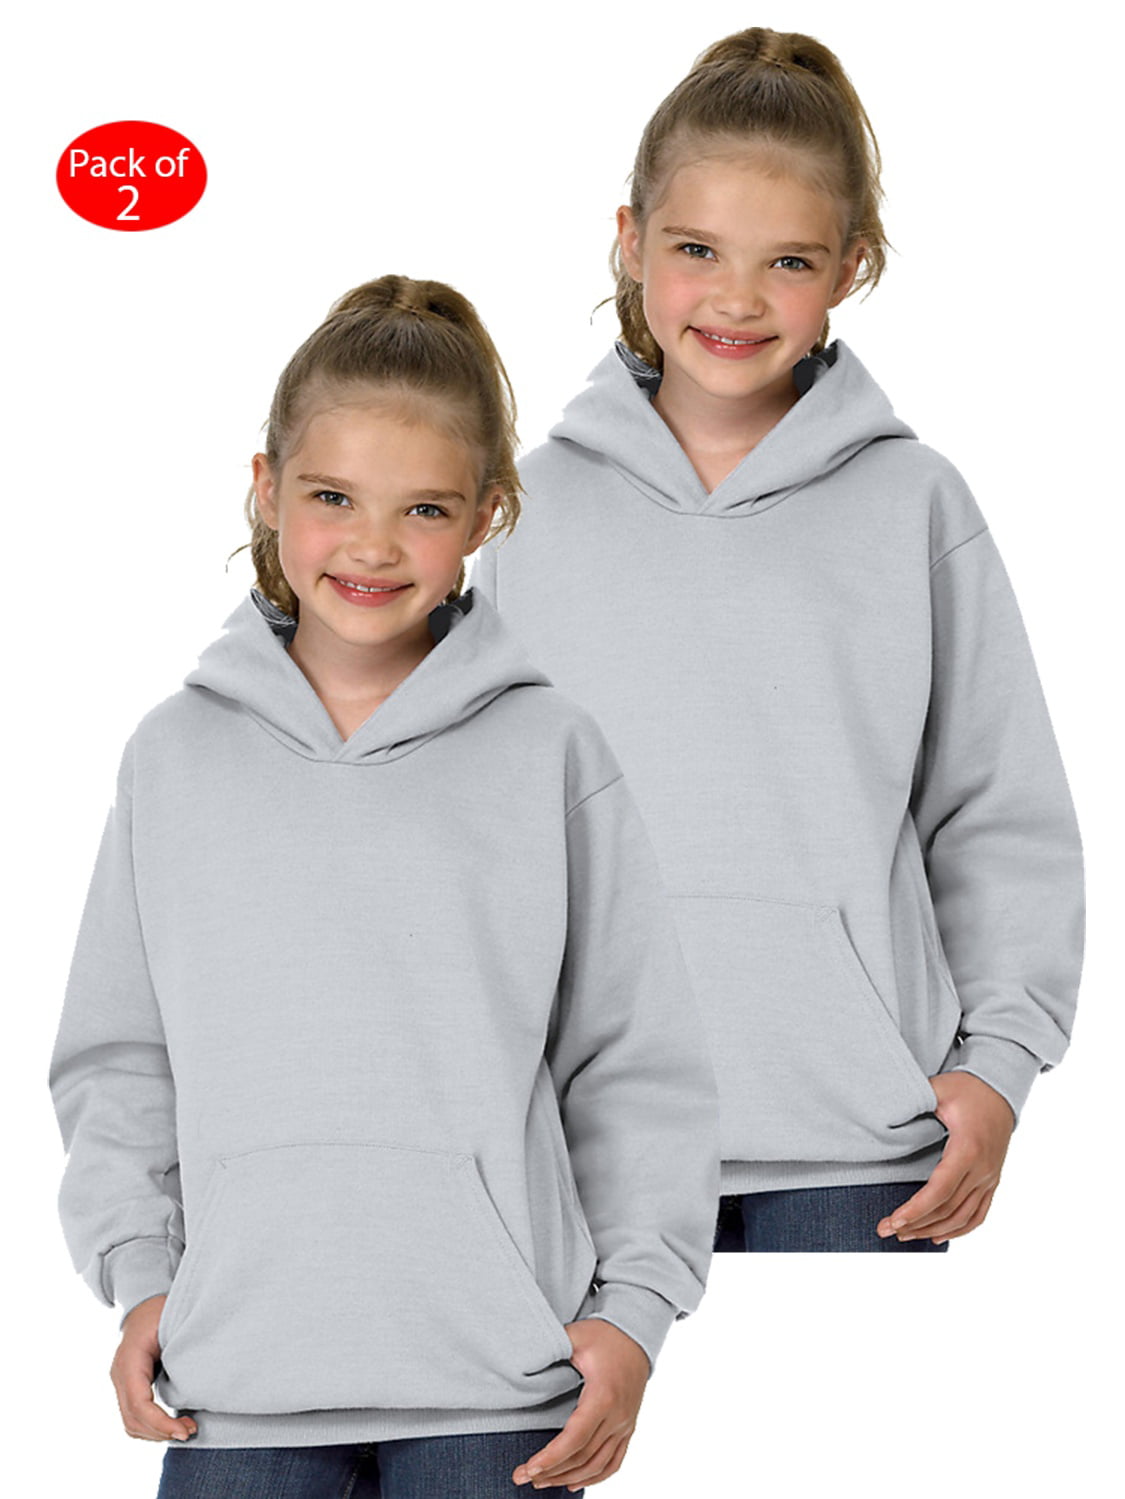 Fleece Pull Over Sweatshirt for Boys Girls Kids Youth Percussion Unisex Toddler Hoodies